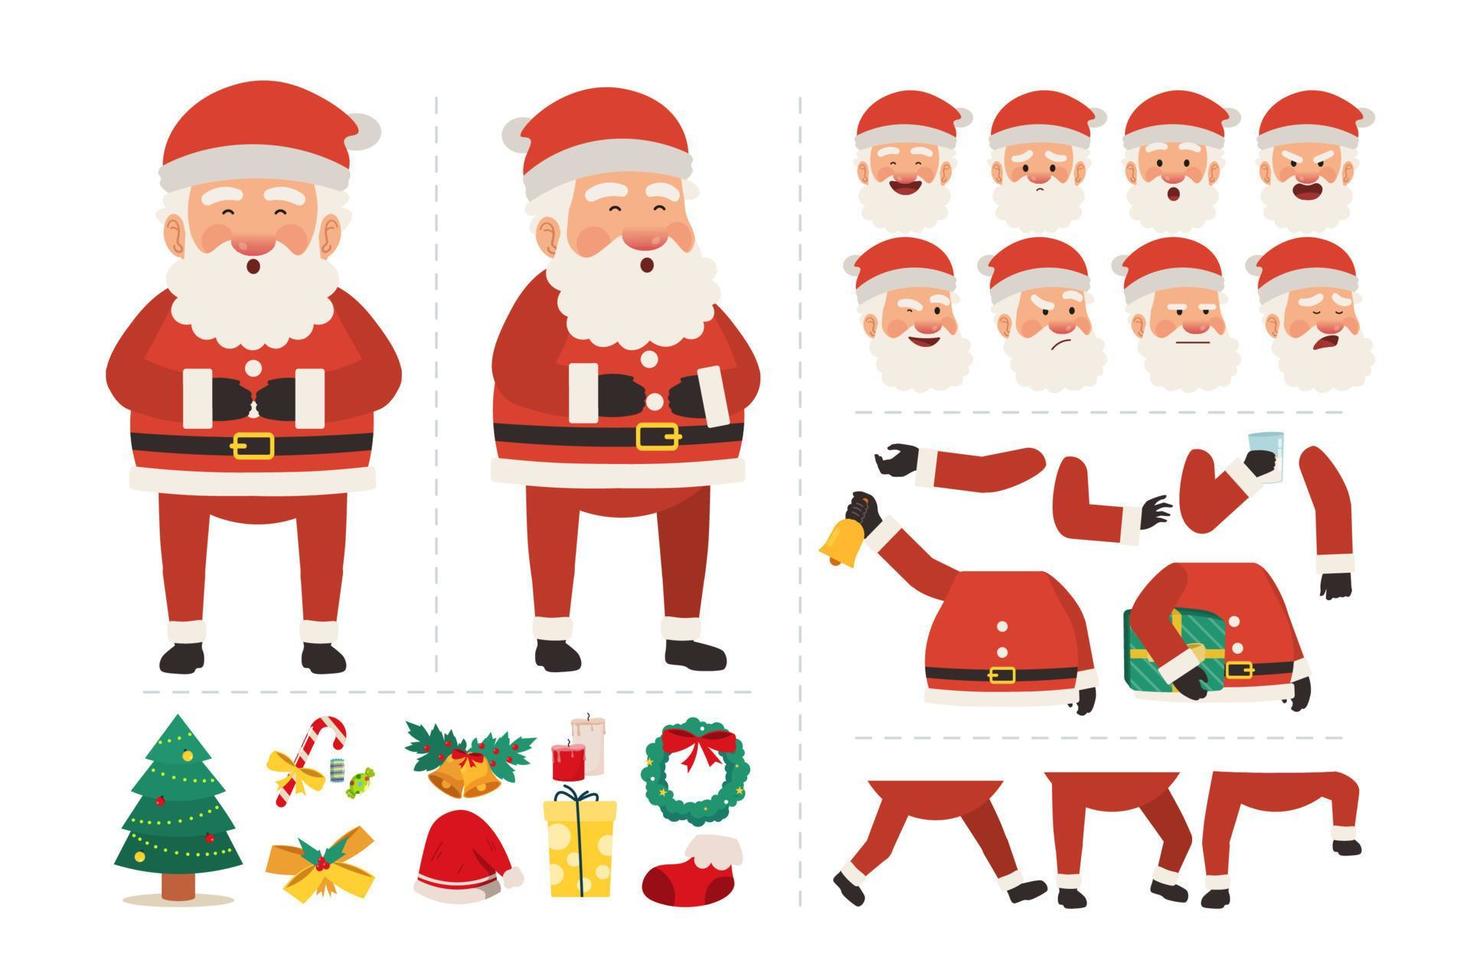 Santa claus cartoon character for animation design with various facial expressions, hand gestures, body and leg movement illustration vector